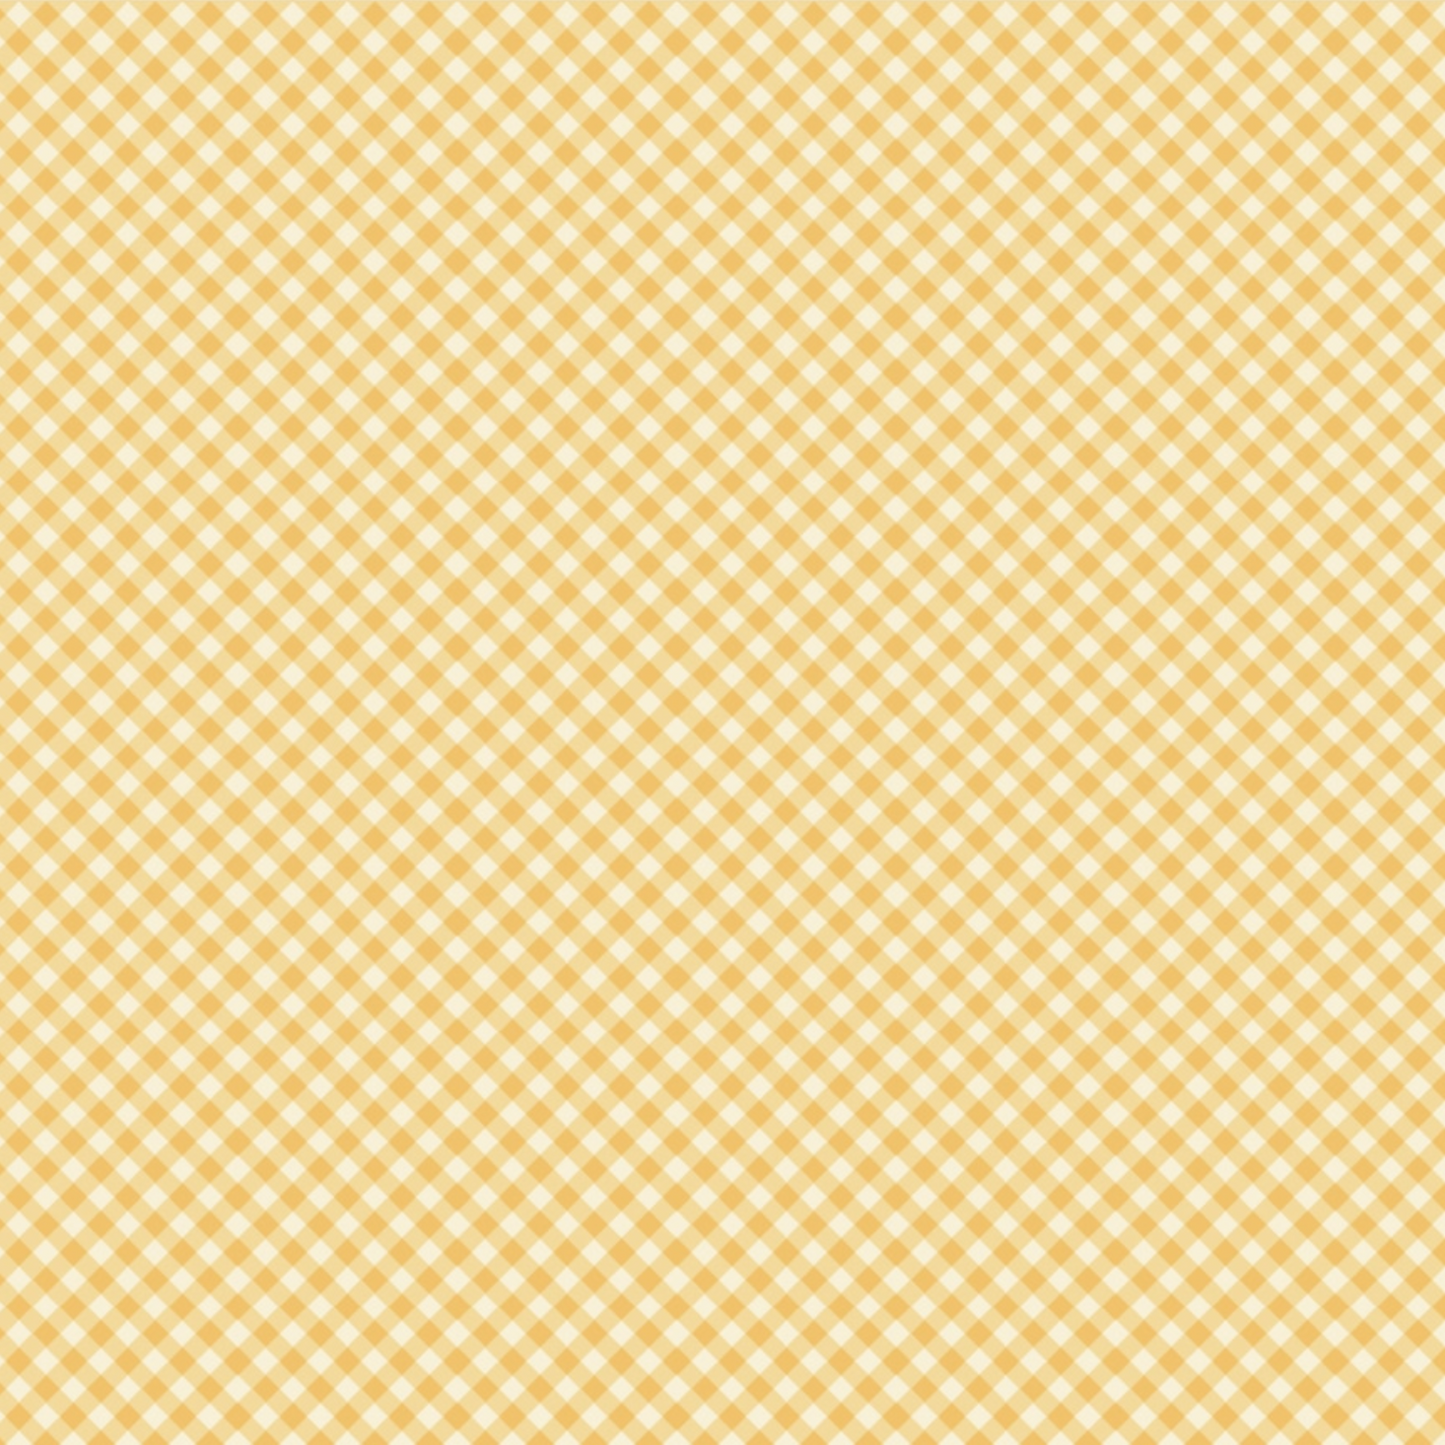 Prairie Sisters Homestead Gingham Forever Yellow PH23411, sold by the 1/2 yard